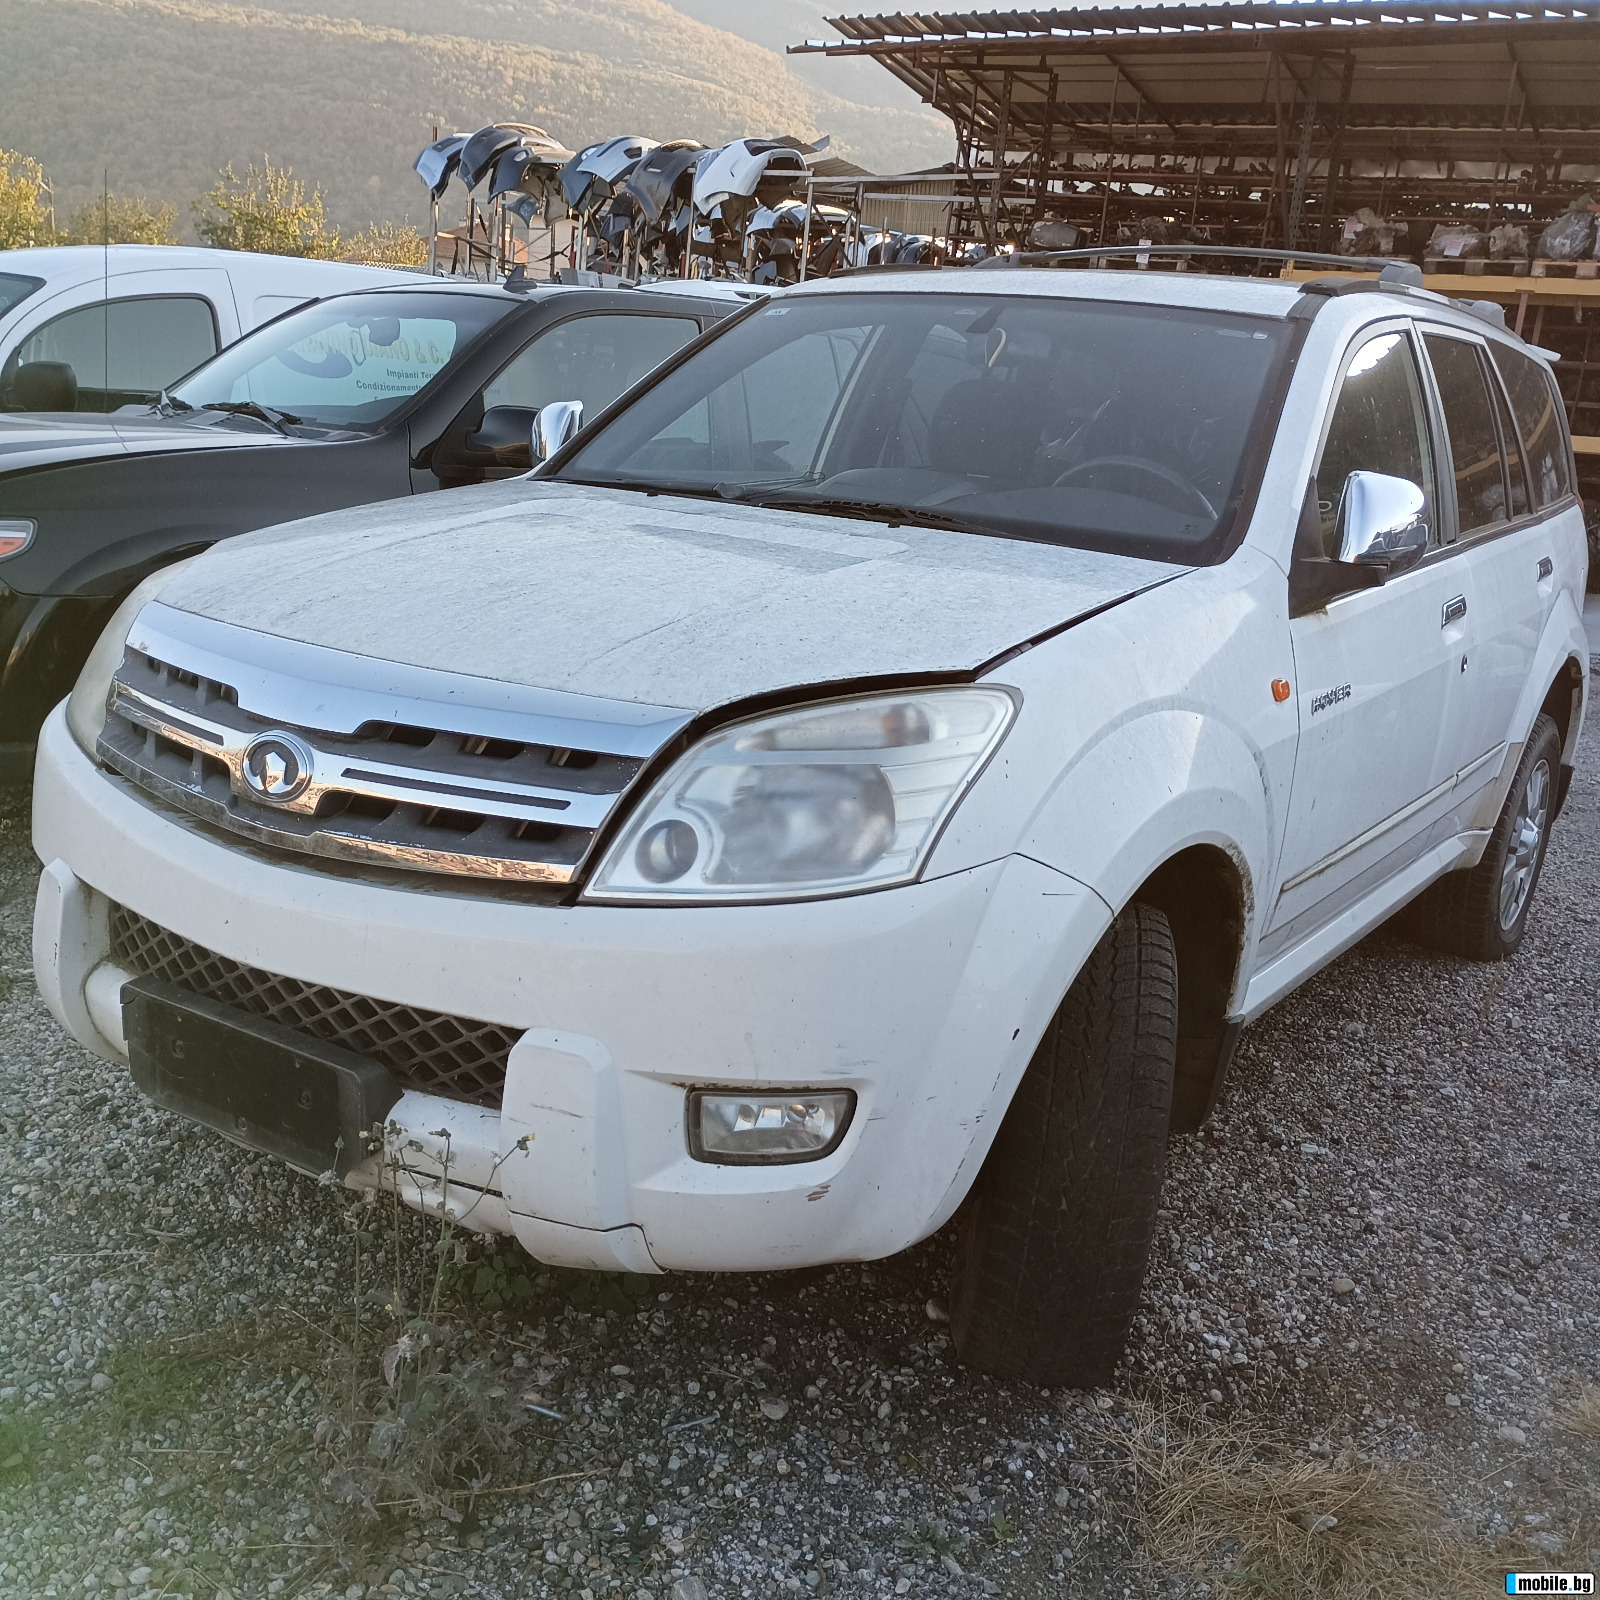 Great Wall Hover Cuv 2.4i | Mobile.bg   1